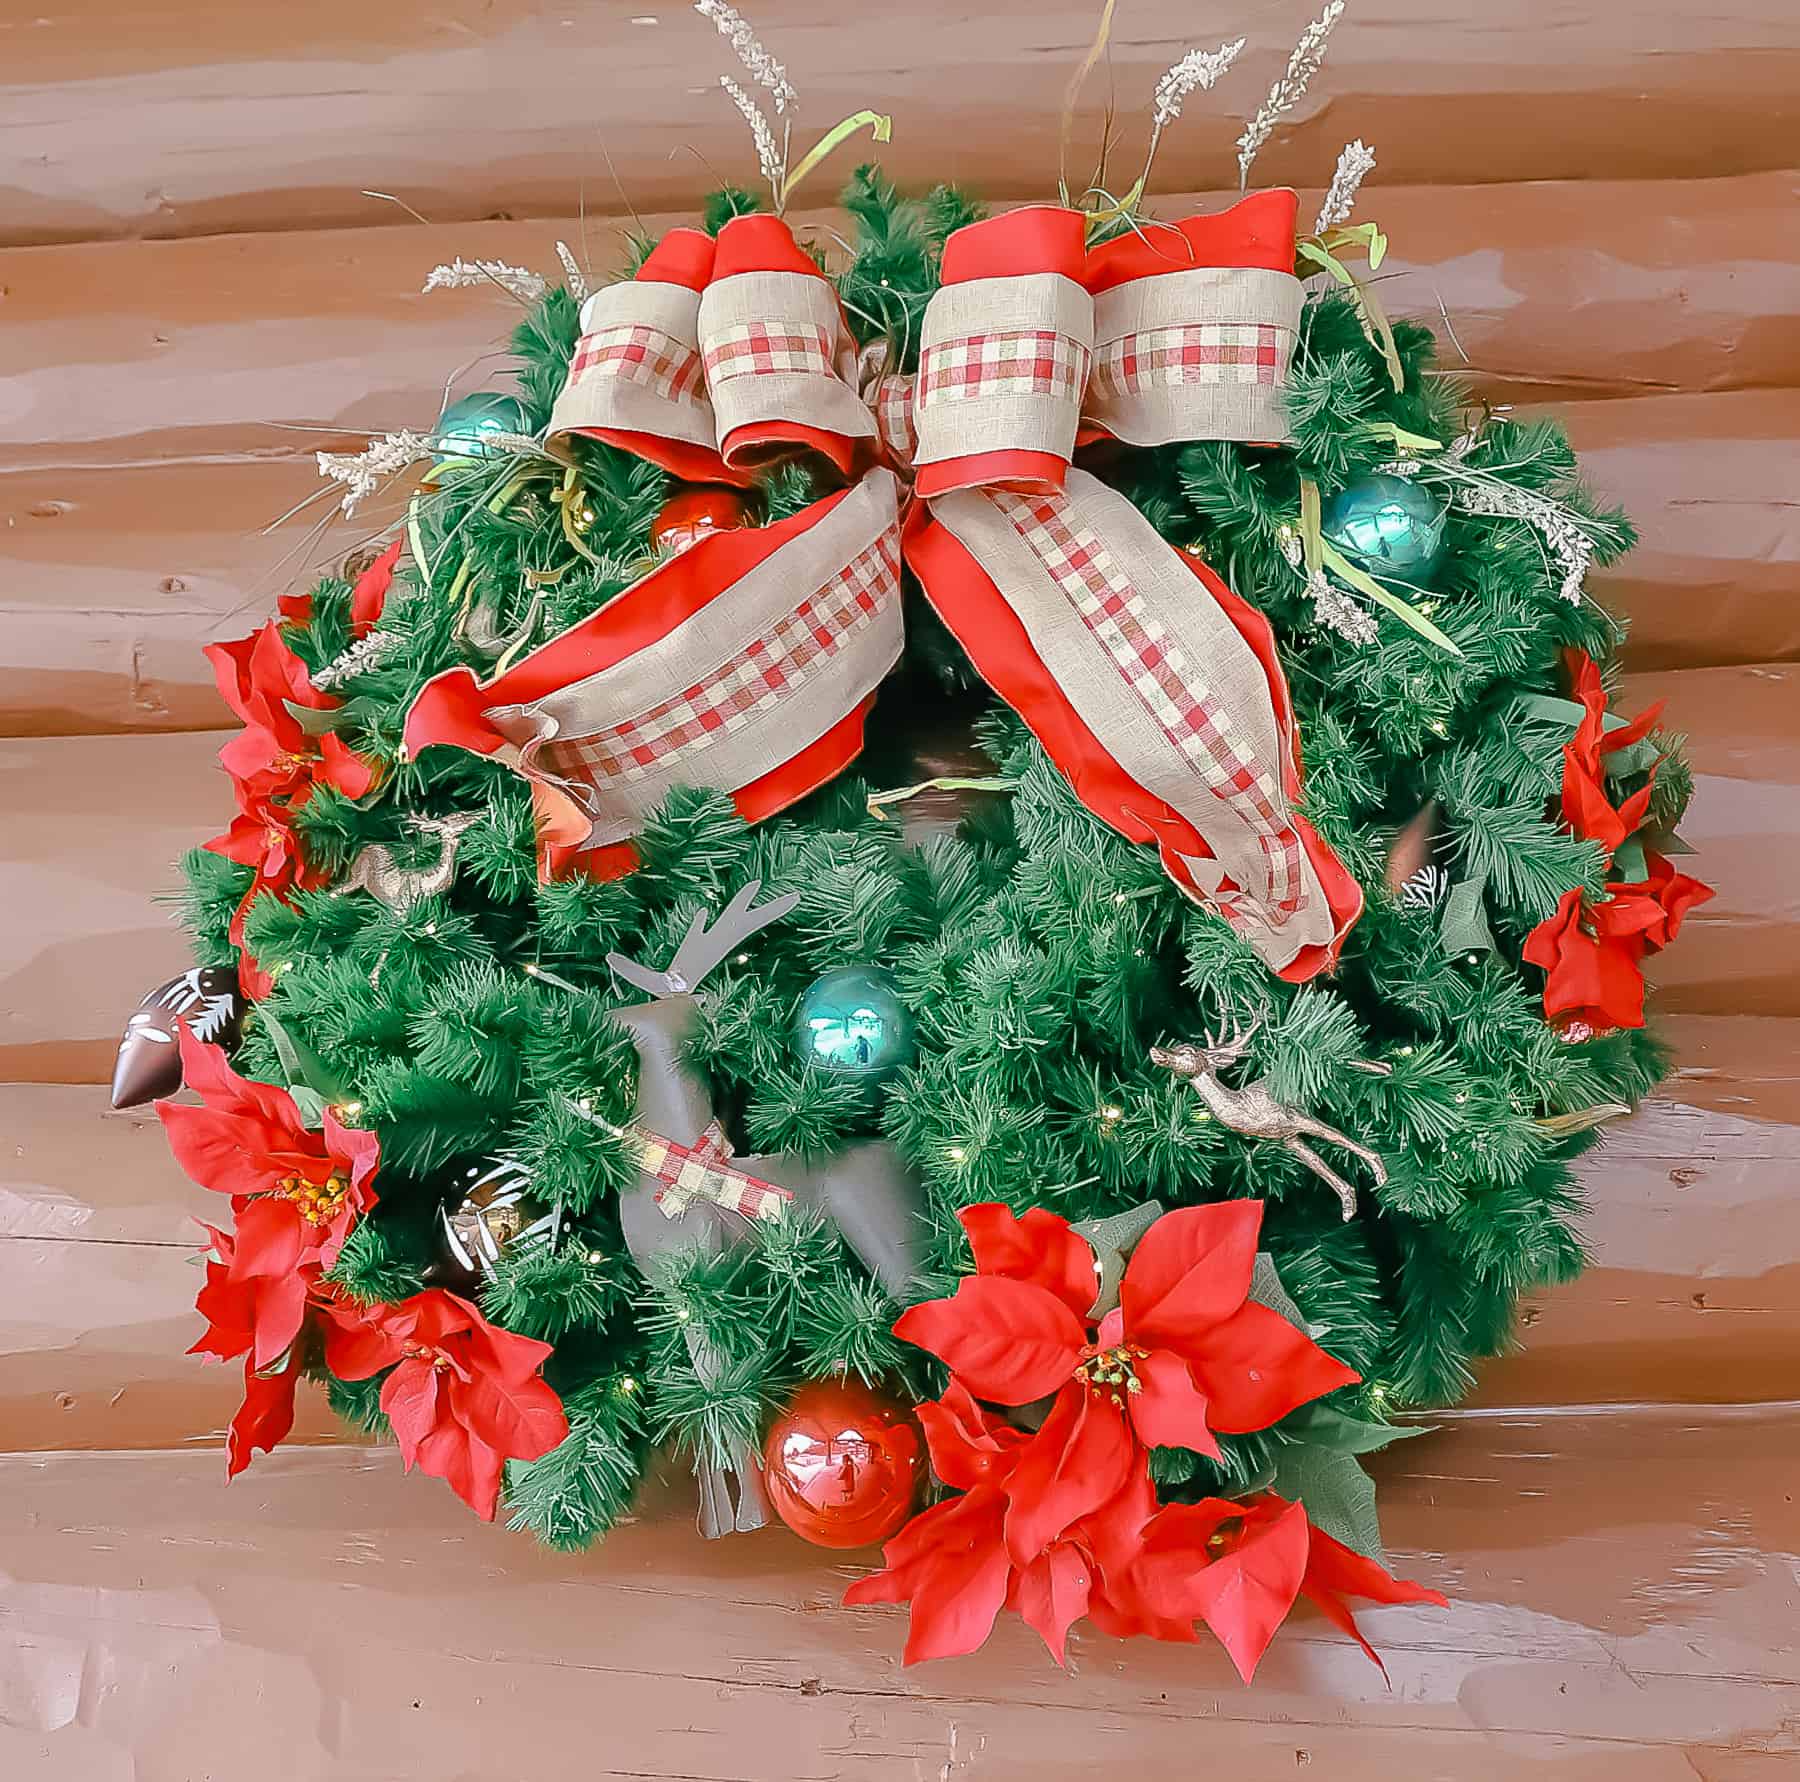 Christmas wreath near the bus stop of Disney's Wilderness Lodge 